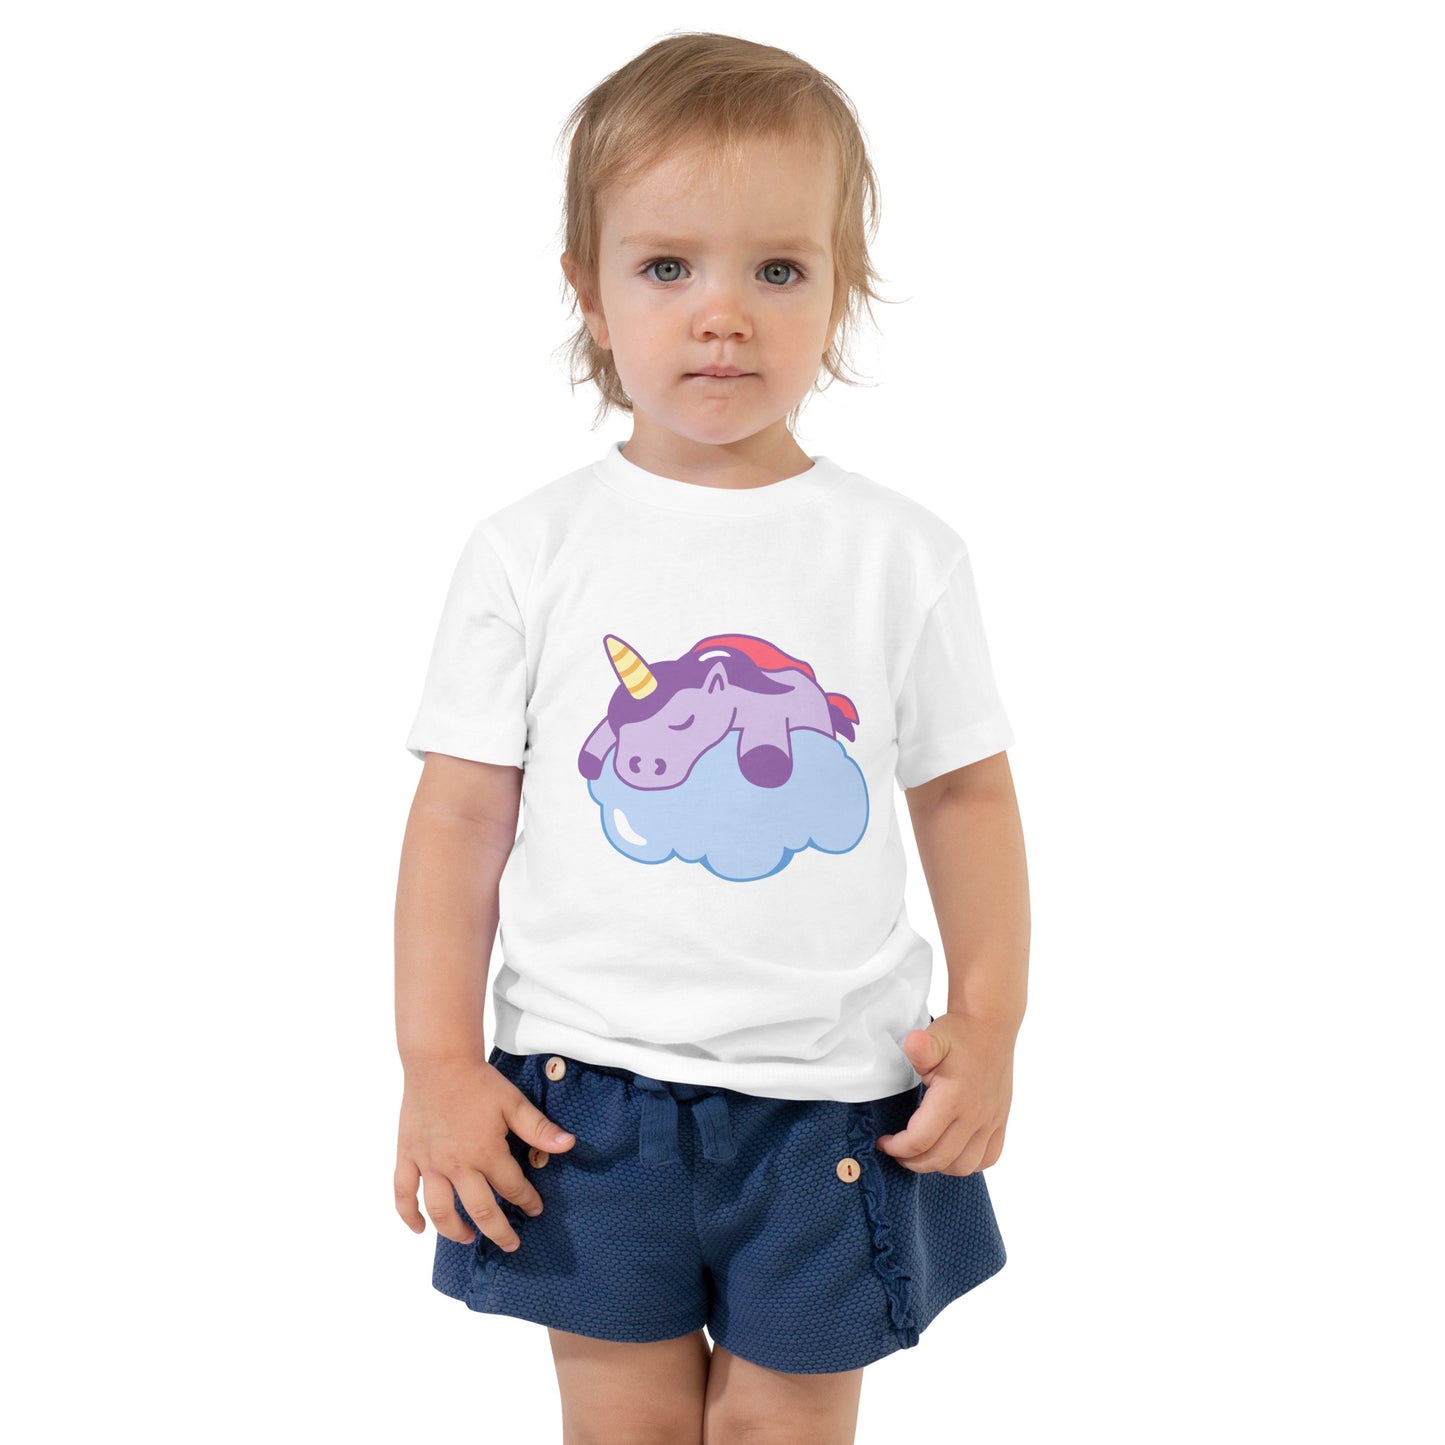 Toddler with a white T-shirt with a print of a sleeping unicorn on a cloud